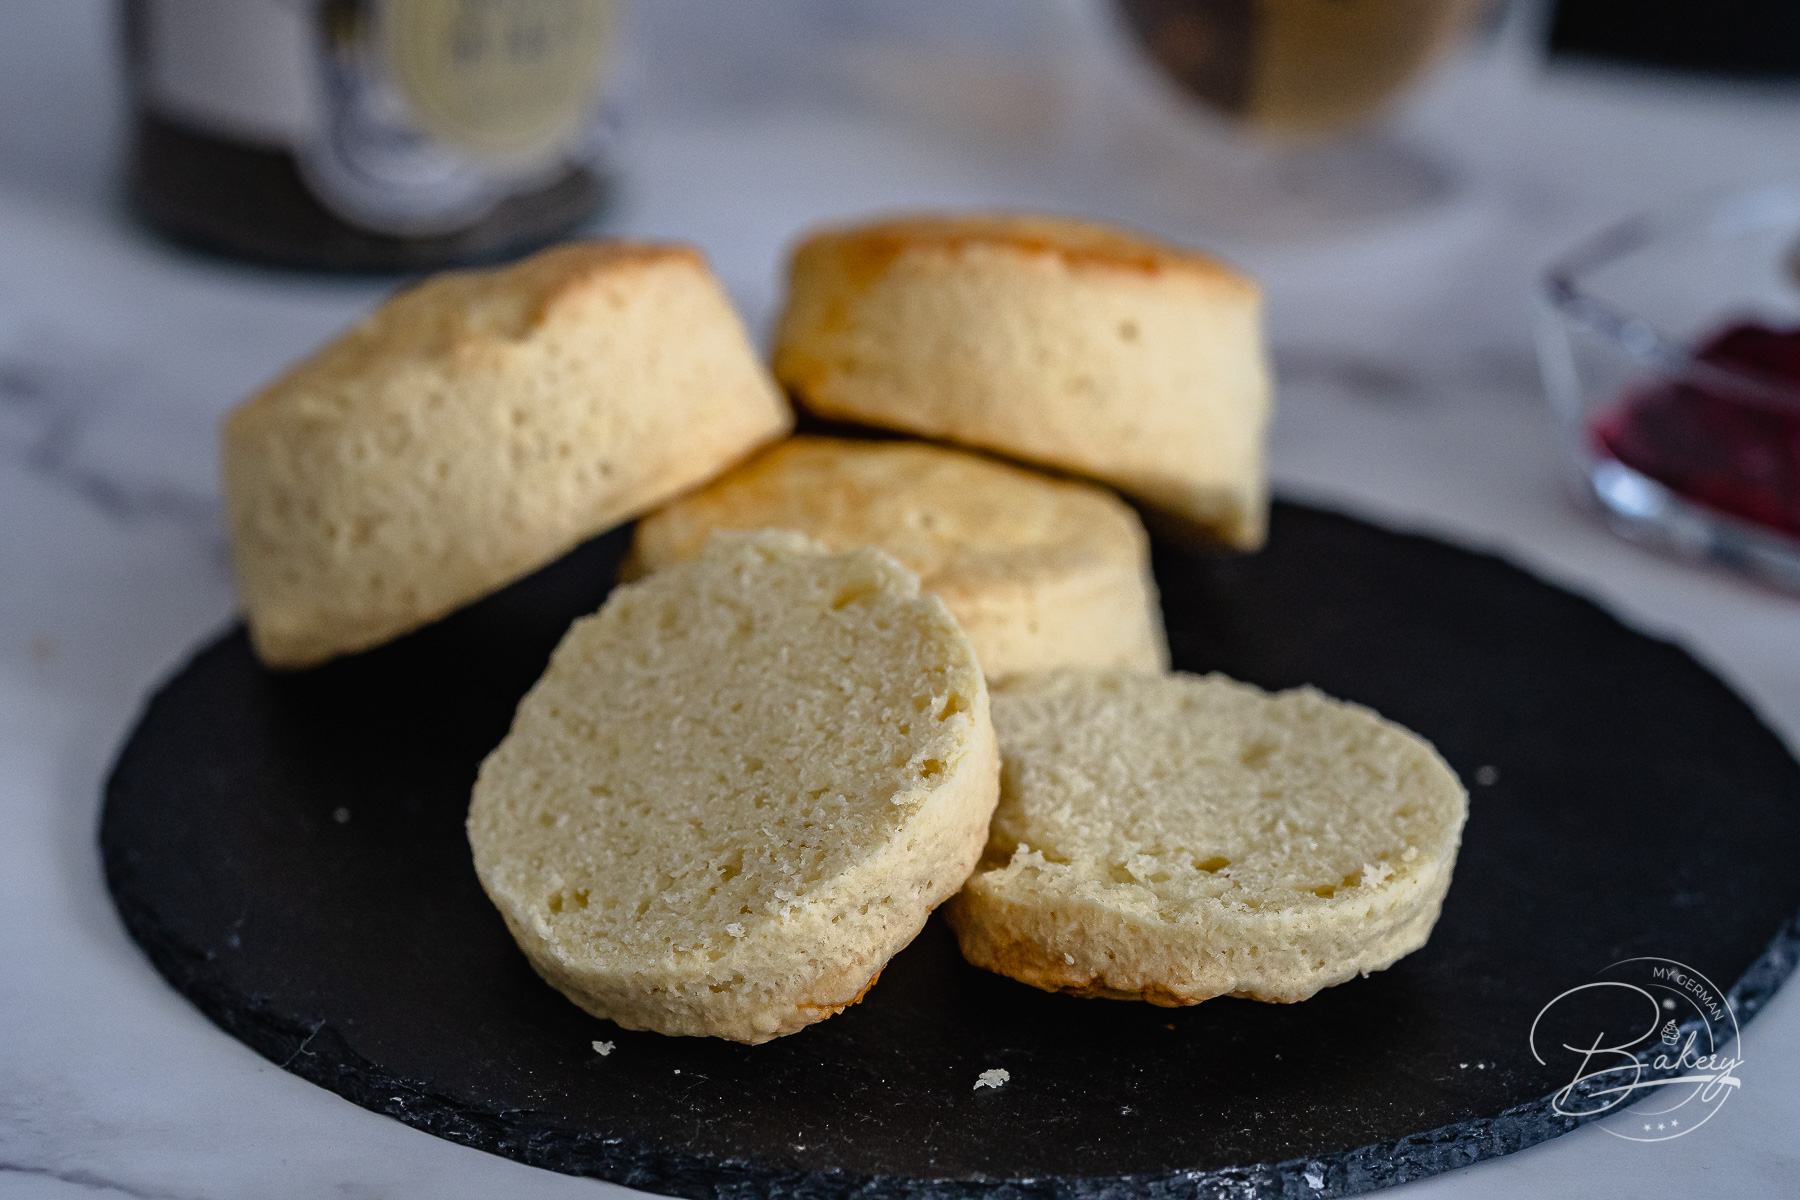 Scones recipe - homemade traditional English scones - flaky biscuits recipe - Simple recipe for original English scones with clotted cream for High Tea Ceremony and for English breakfast - little round cakes